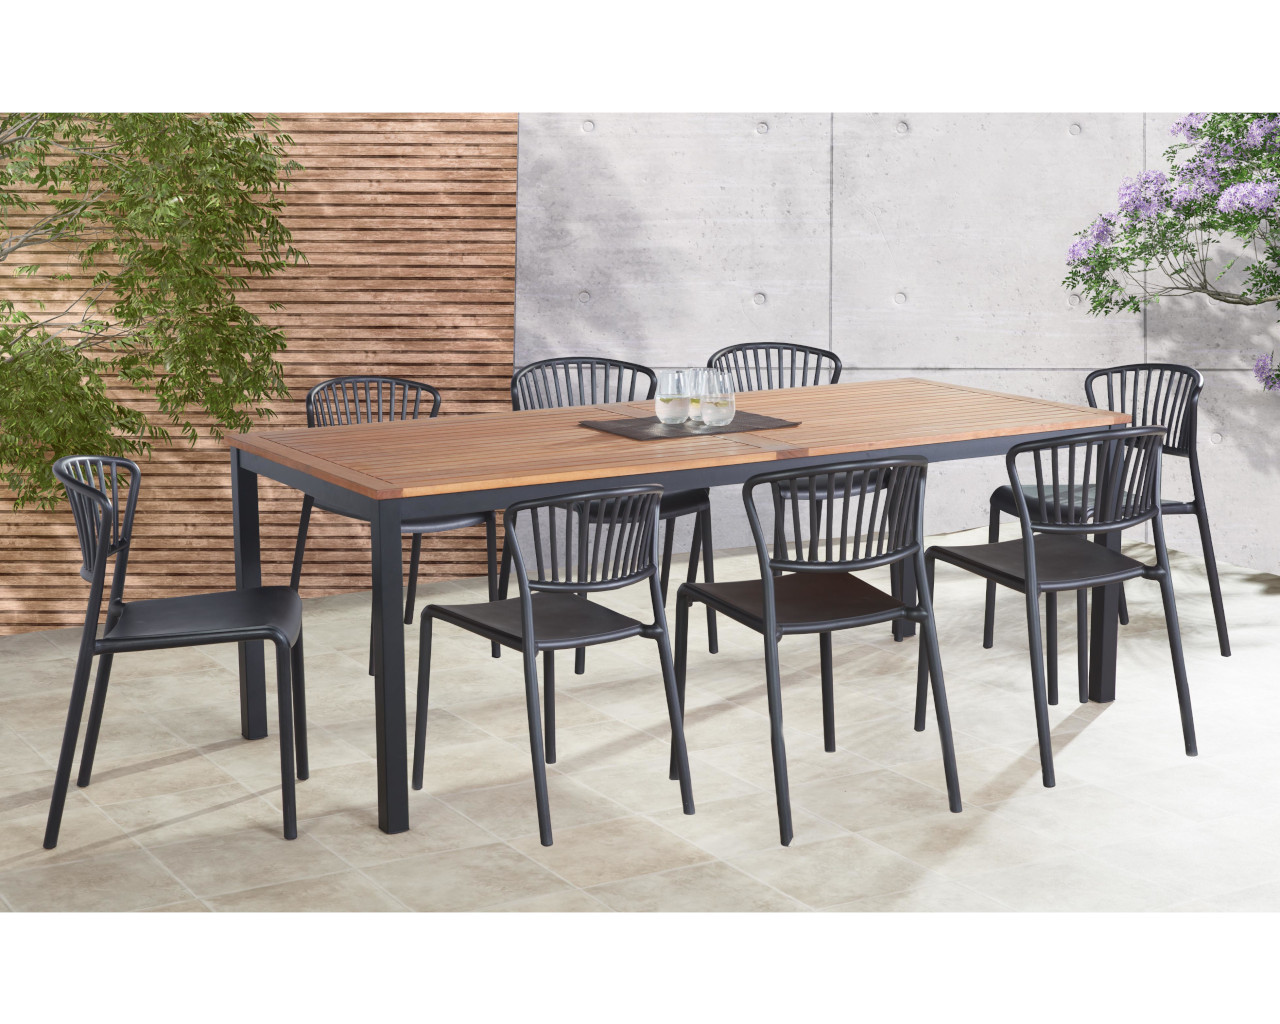 Florence-Lynx 9 Piece Dining Setting (Black), , hi-res image number null